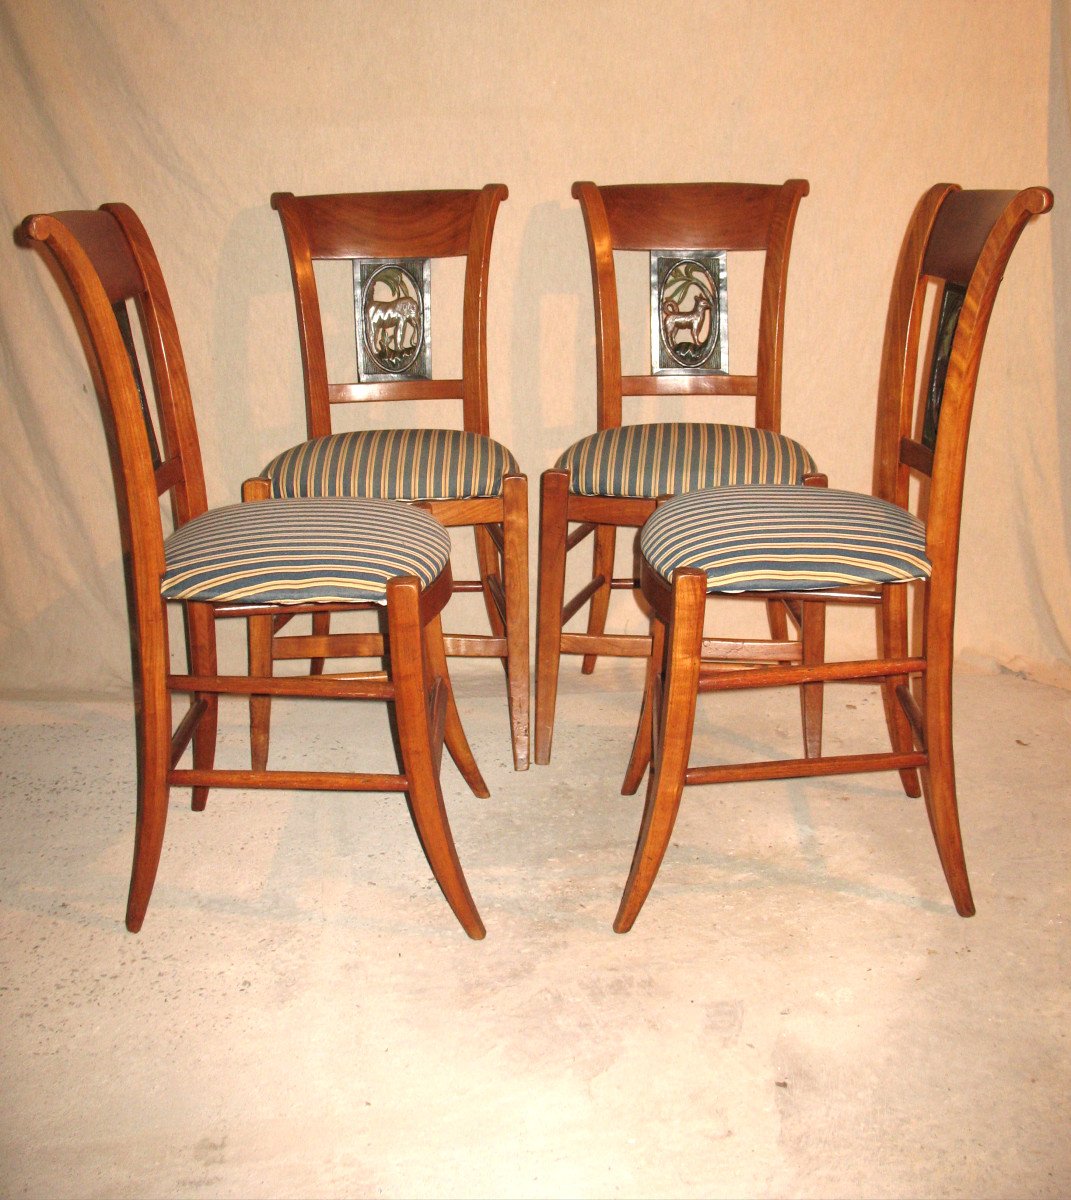 Suite Of 4 Directoire Chairs In Cherry Wood Decor With Animals From 4 Continents-photo-4